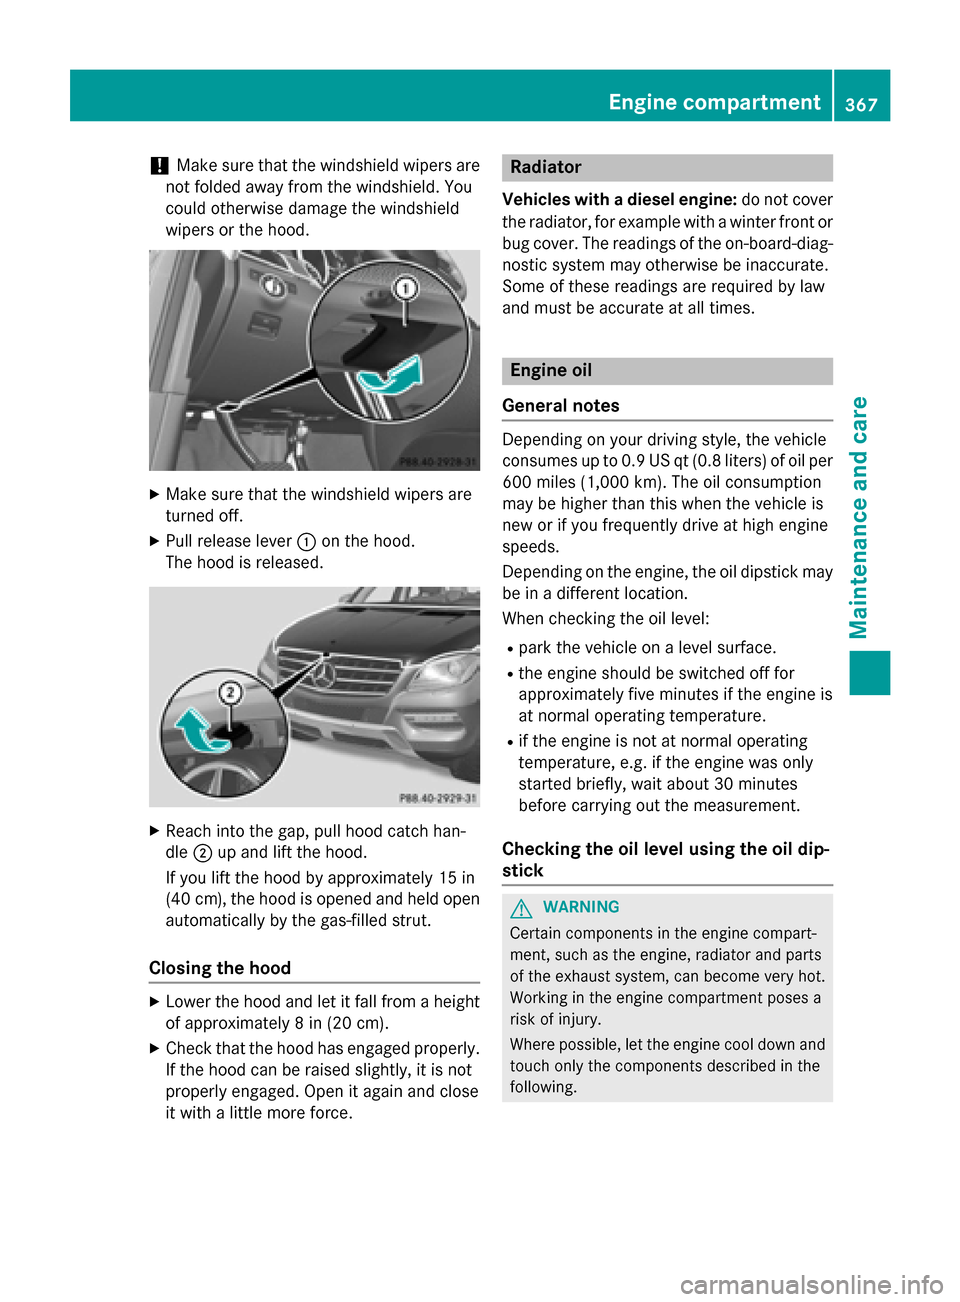 MERCEDES-BENZ M-Class 2015 W166 Owners Manual !
Make sure that the windshield wipers are
not folded away from the windshield. You
could otherwise damage the windshield
wipers or the hood. X
Make sure that the windshield wipers are
turned off.
X P